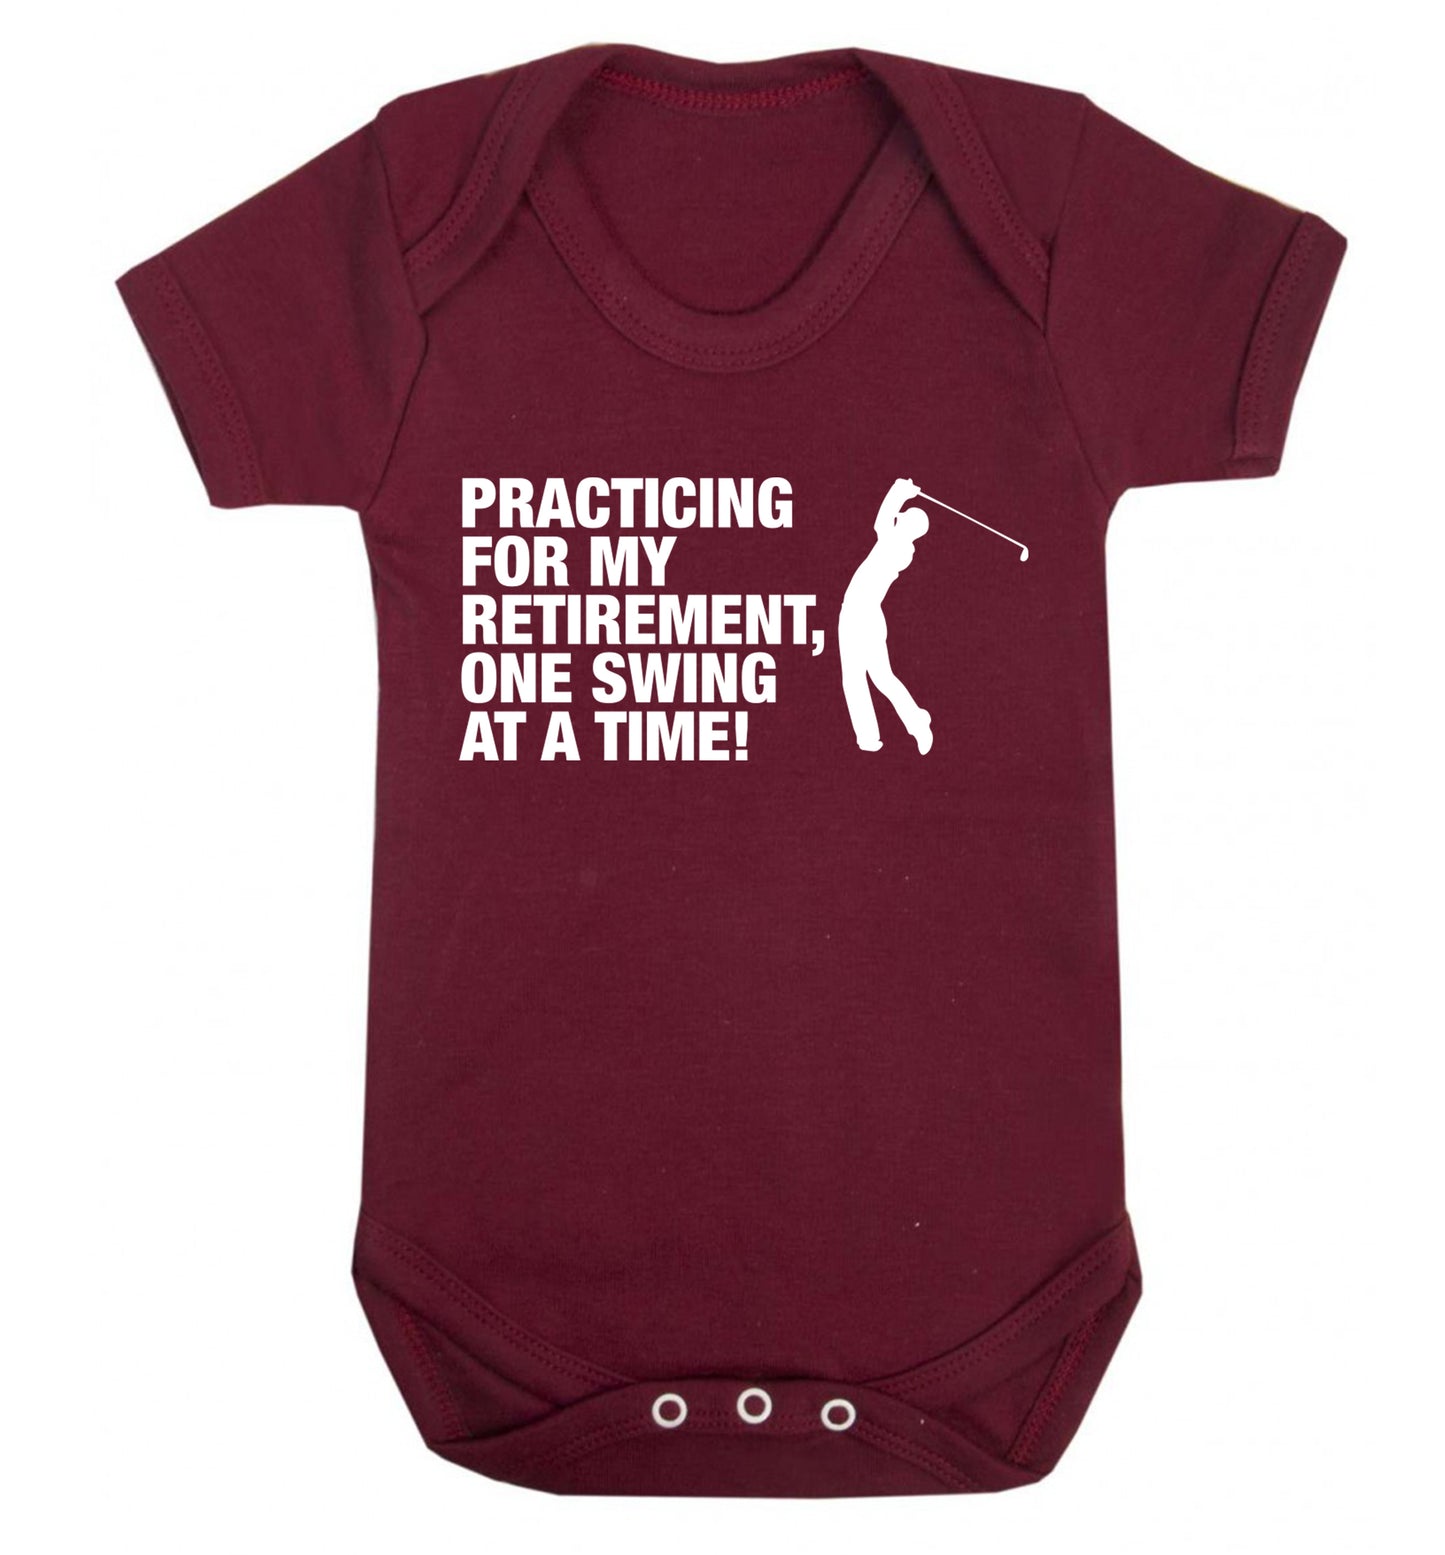 Practicing for my retirement one swing at a time Baby Vest maroon 18-24 months